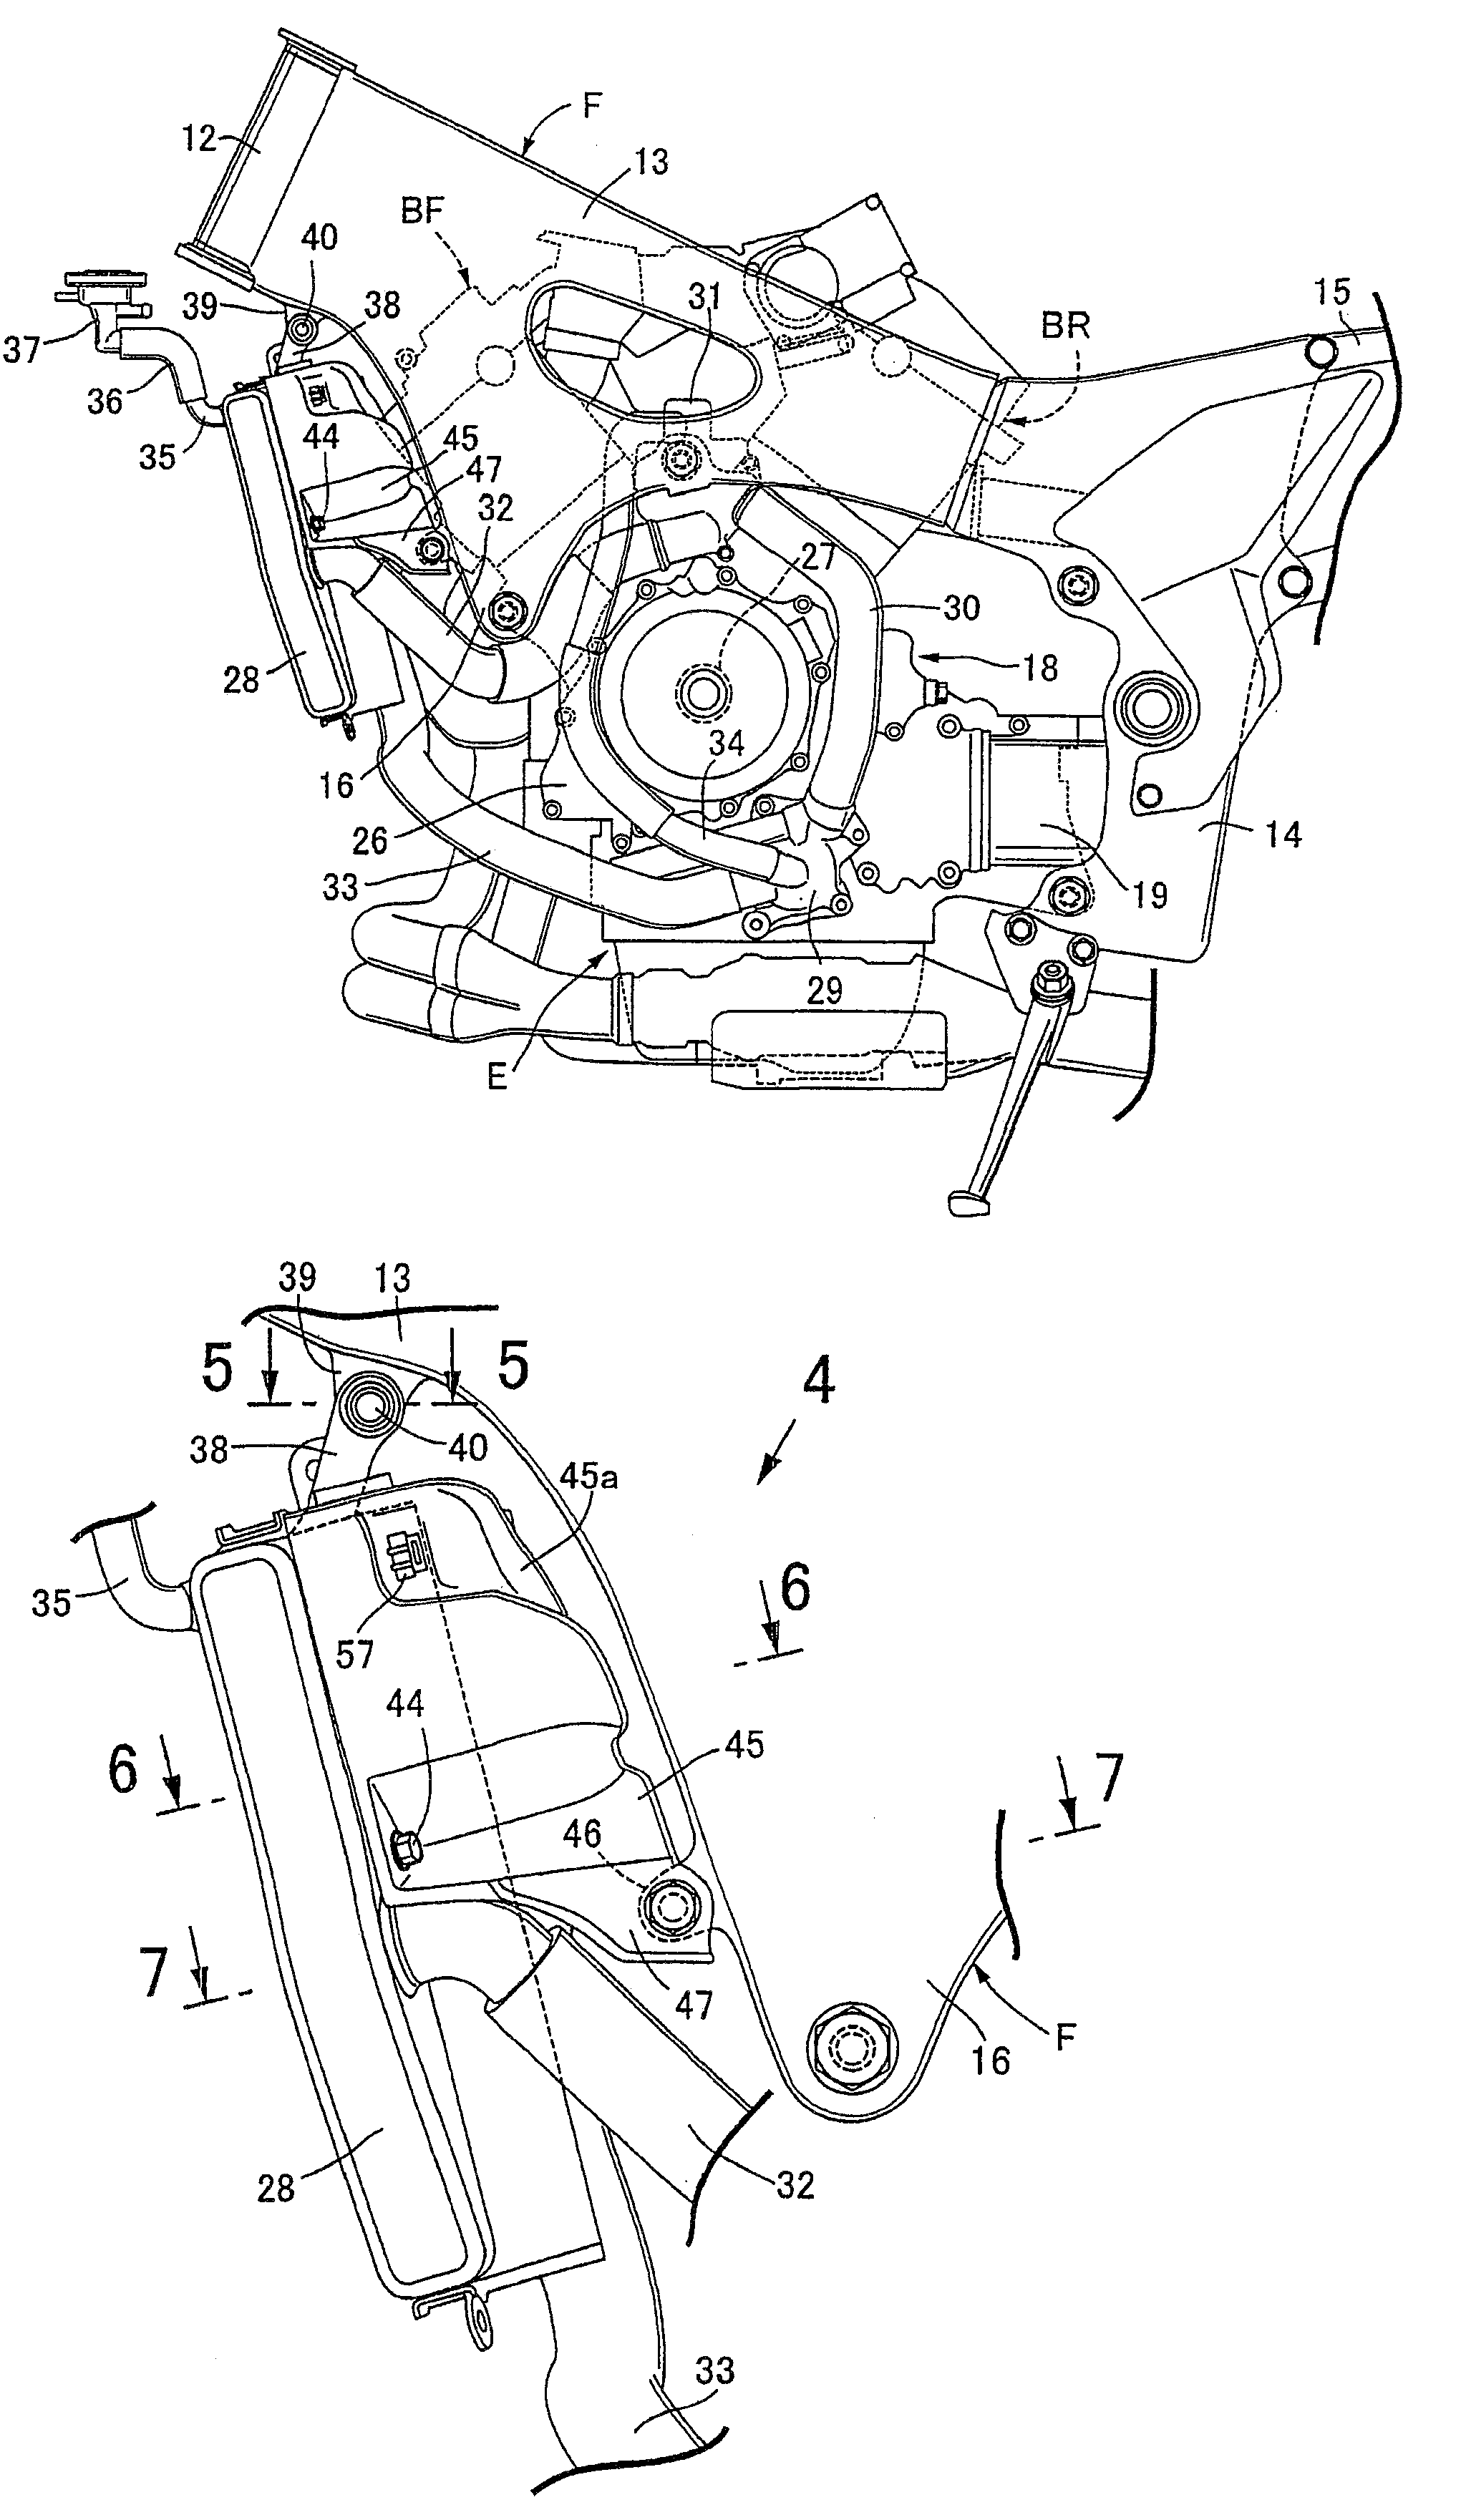 Radiator mounting structure for motorcycle